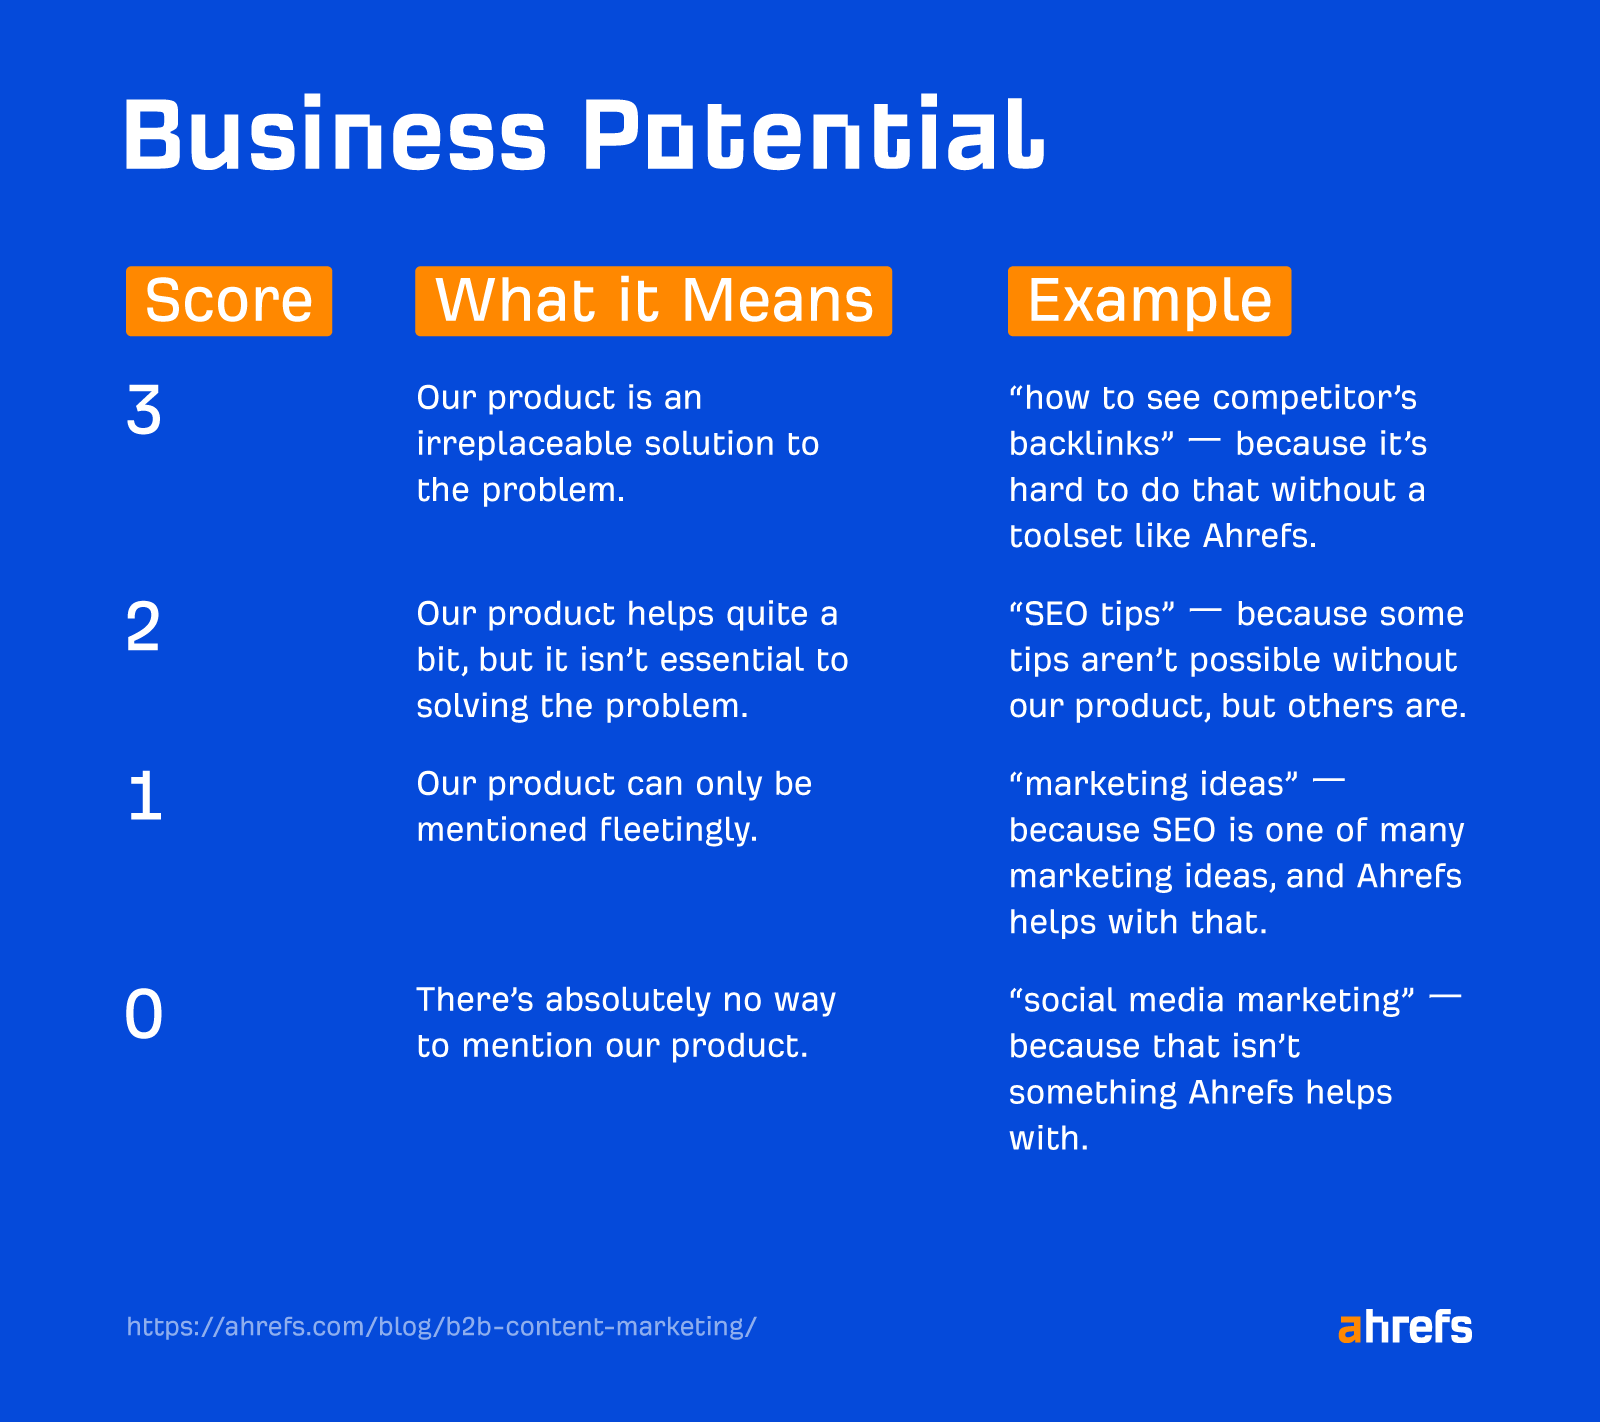 How to judge the business potential of a topic
